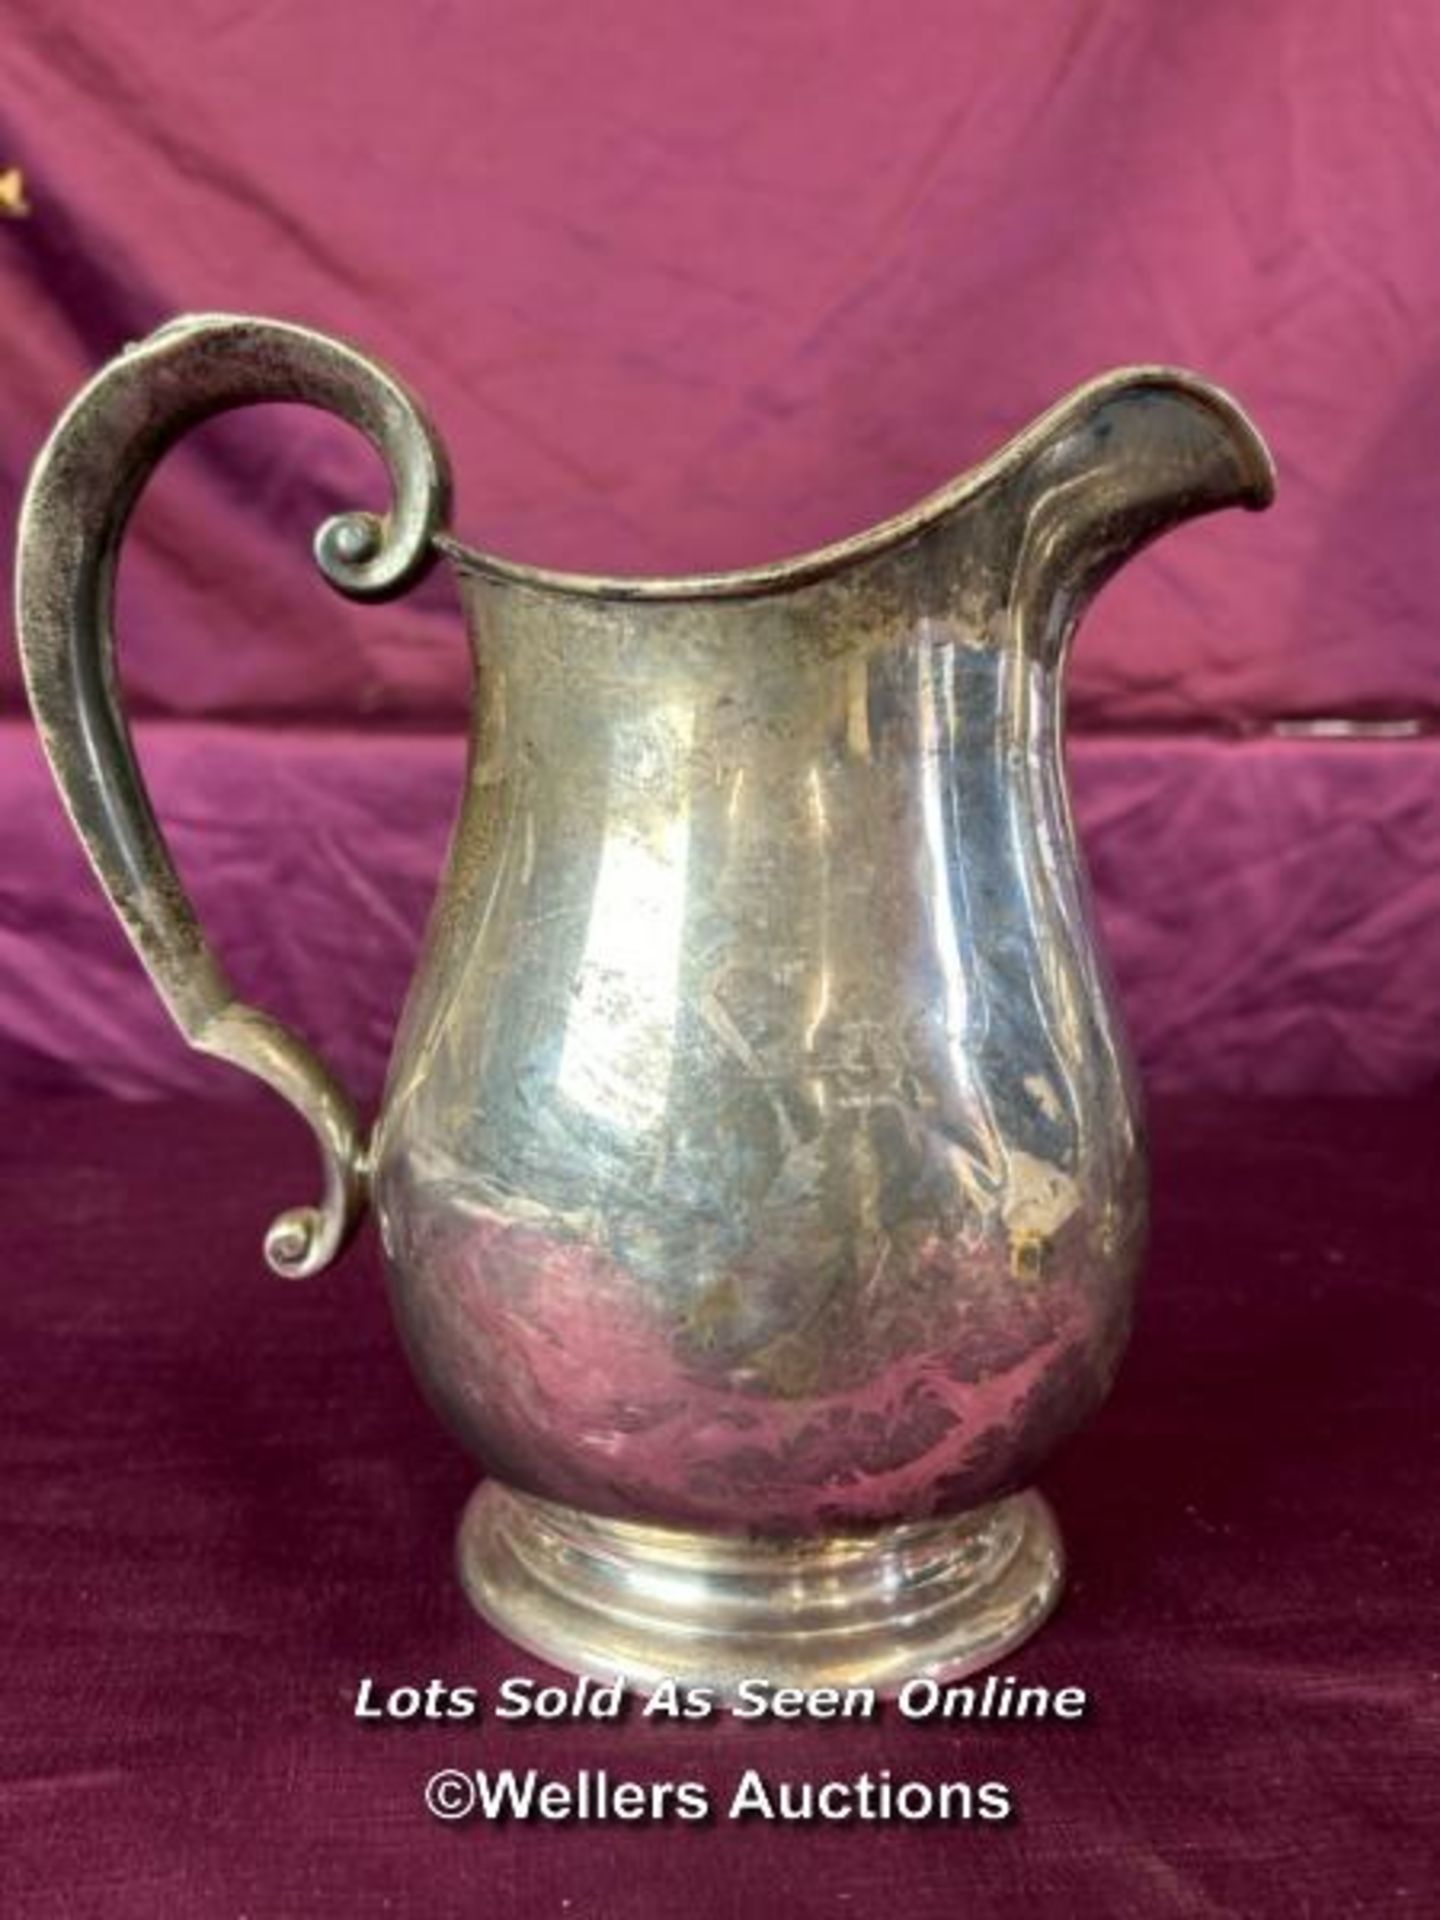 A PRESENTATION SILVER PLATED WATER JUG, ENGRAVED 'PATRICK T. SEXTON, 25TH ANNIVERSARY 1956, GREAT - Image 2 of 3